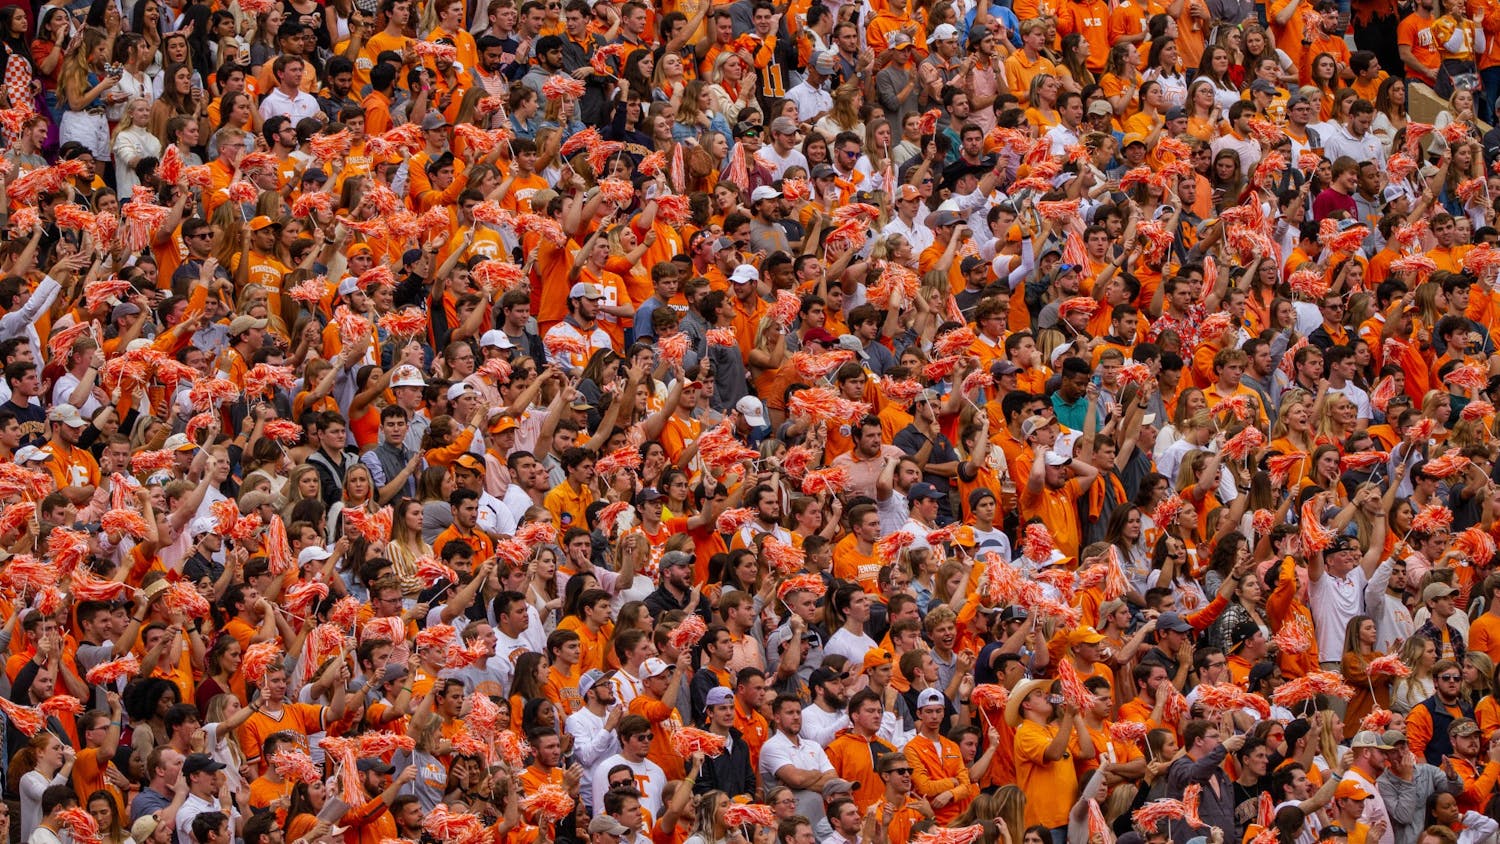 Fans in the student section cheer on the Vols at Neyland Stadium during their game against South Carolina on October 26, 2019.